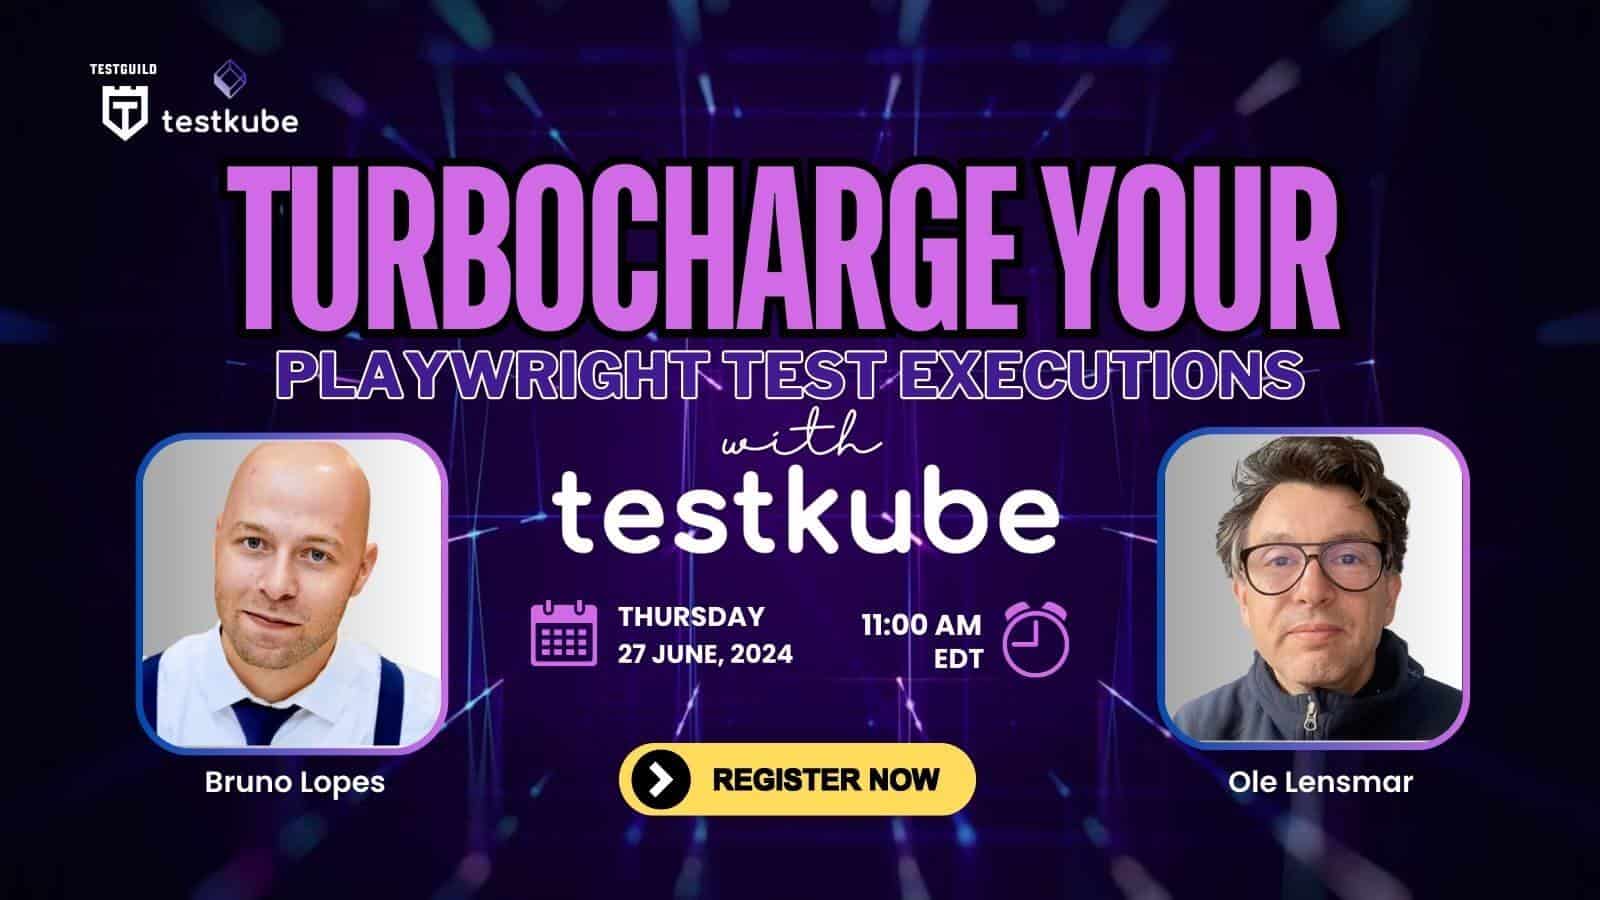 Promotional graphic for a webinar titled "Turbocharge Your Playwright Test Executions with Testkube," featuring Bruno Lopes and Ole Lensmar. Scheduled for Thursday, June 27, 2024, at 11:00 AM EDT.